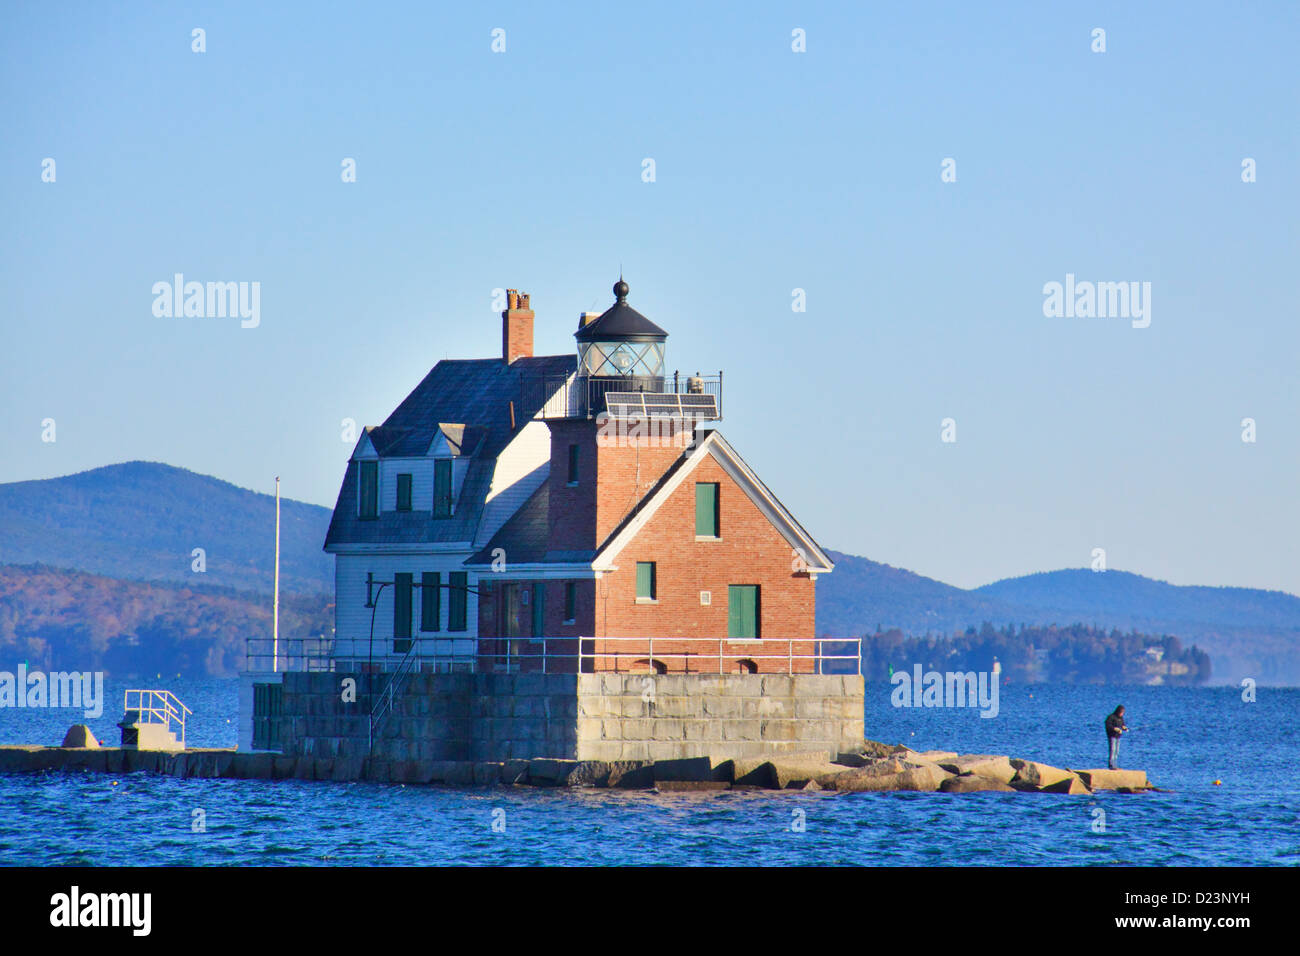 Rockland Breakwater Light, Rockland, Maine, USA Banque D'Images